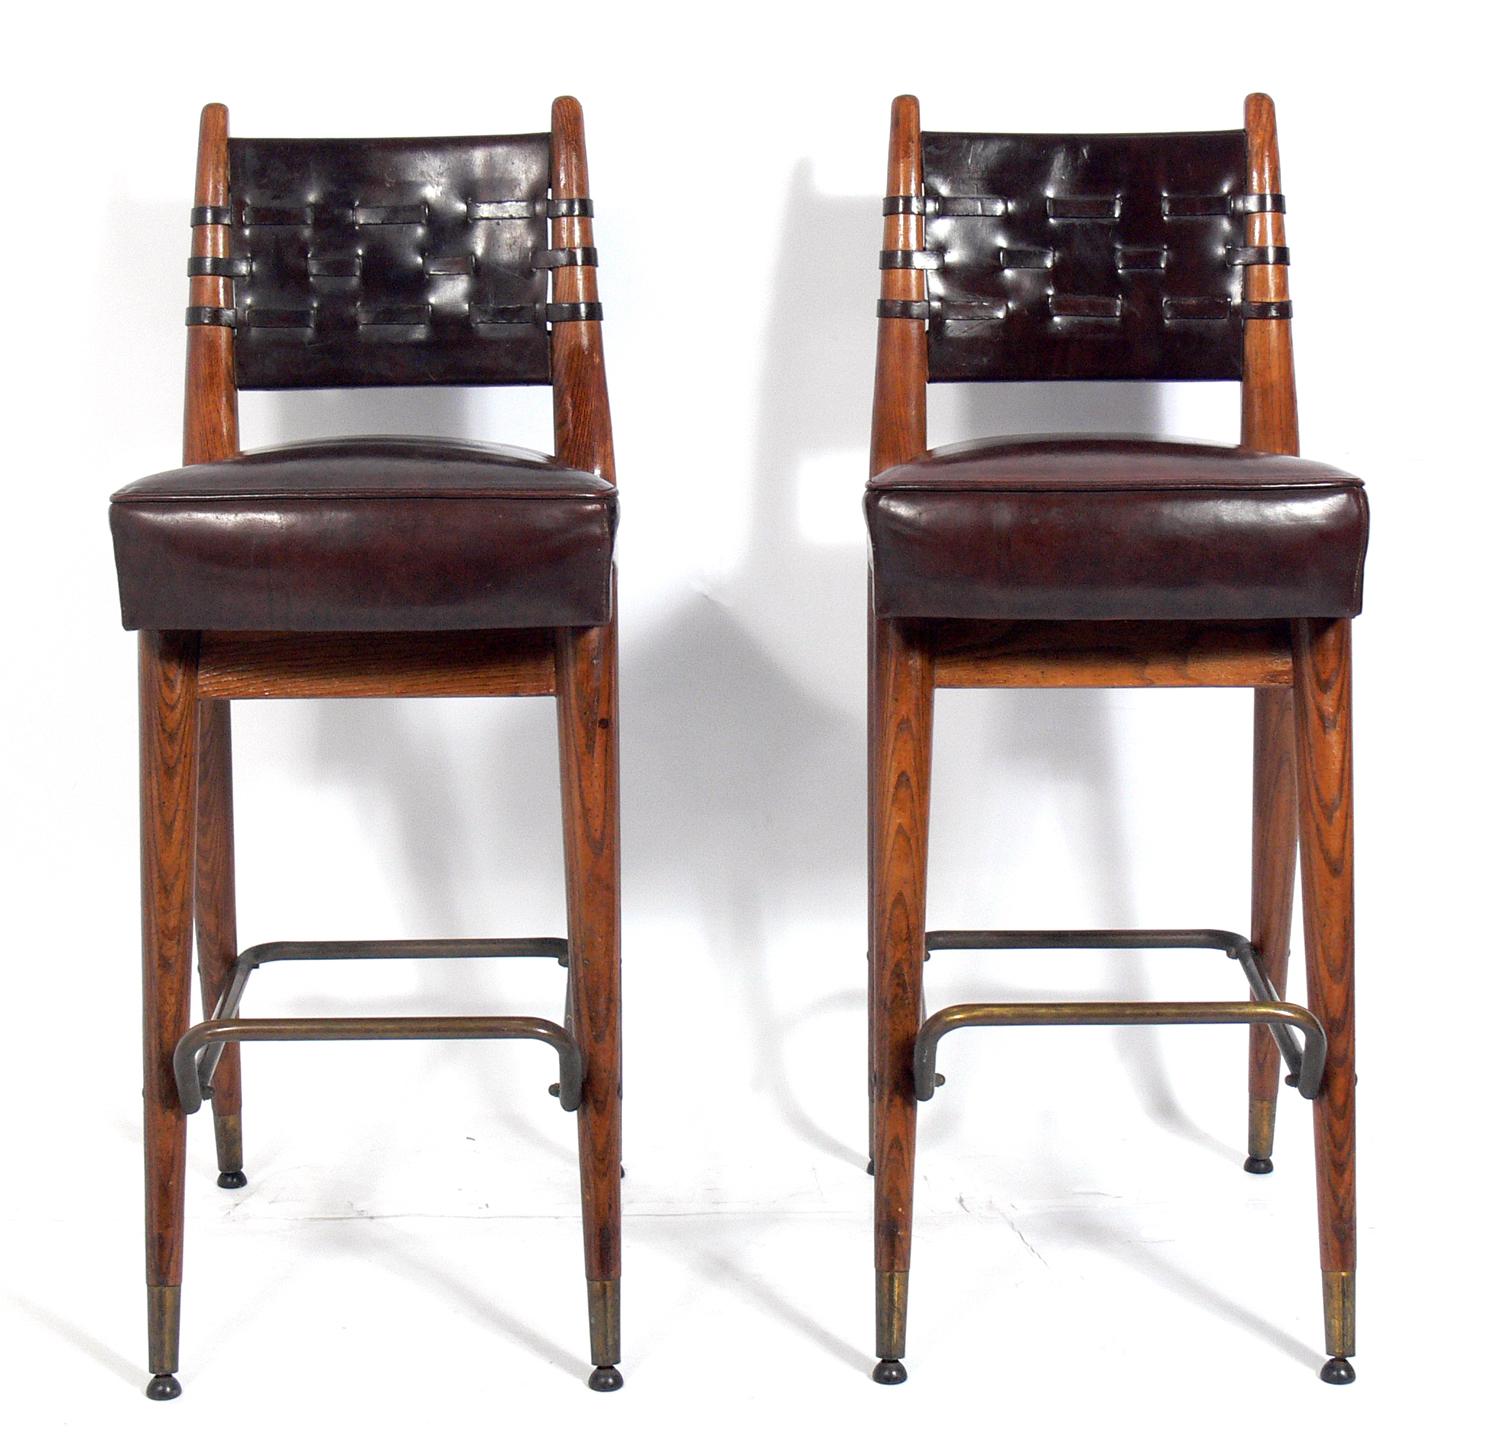 Pair of curvaceous oak leather and brass bar stools, American, circa 1960s. They retain their original deep brown leather upholstery with interesting woven leather backs. Curvaceous oak frames with brass foot rests and sabots. They retain their warm